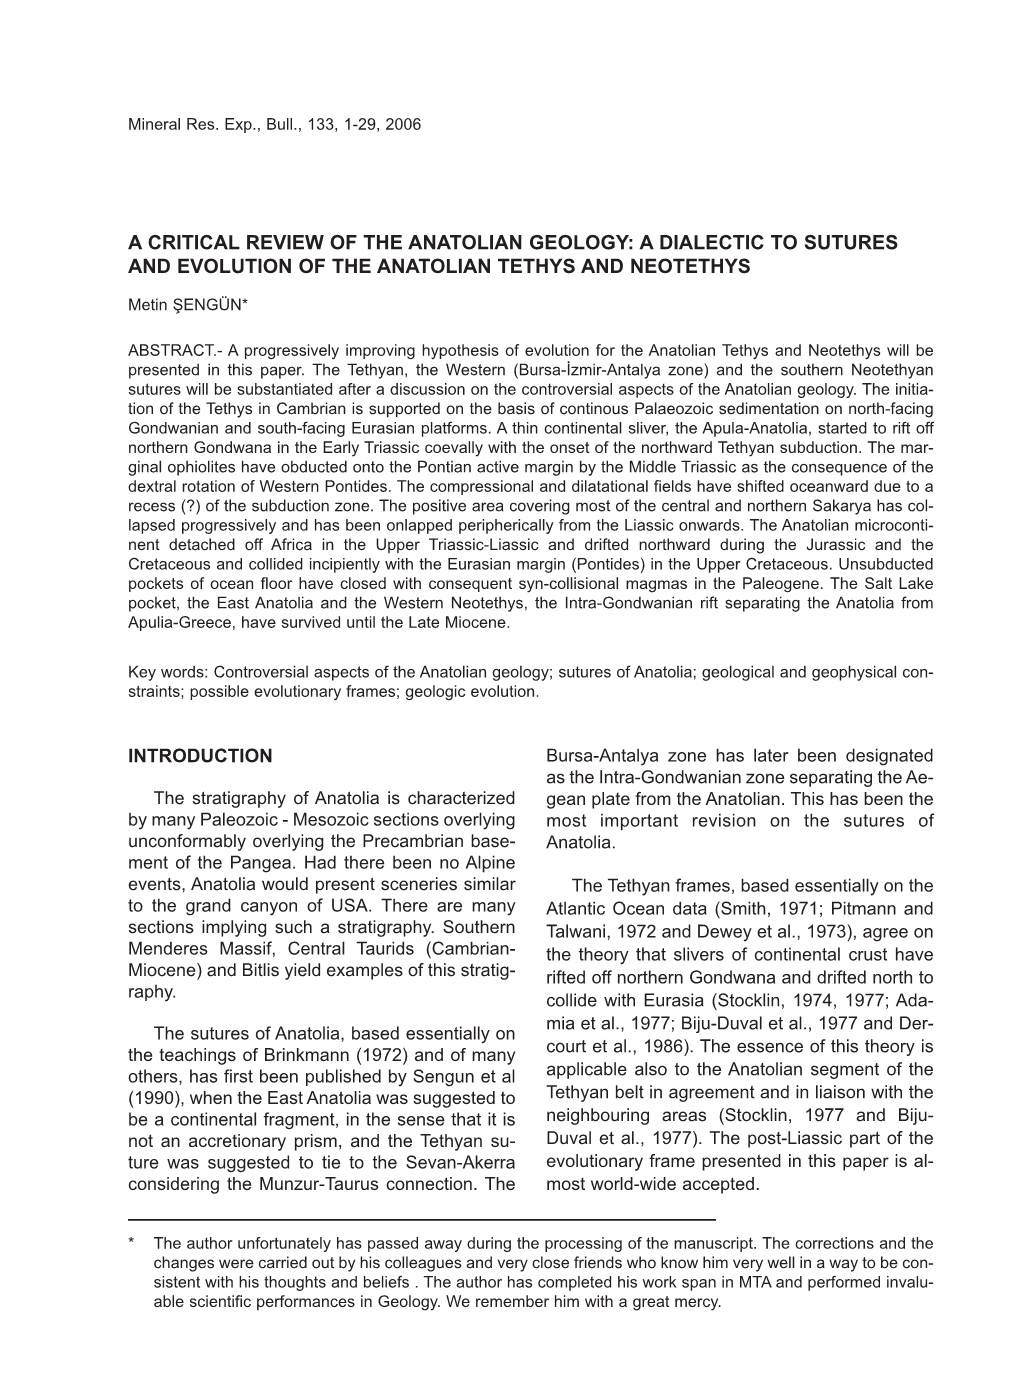 A Critical Review of the Anatolian Geology: a Dialectic to Sutures and Evolution of the Anatolian Tethys and Neotethys